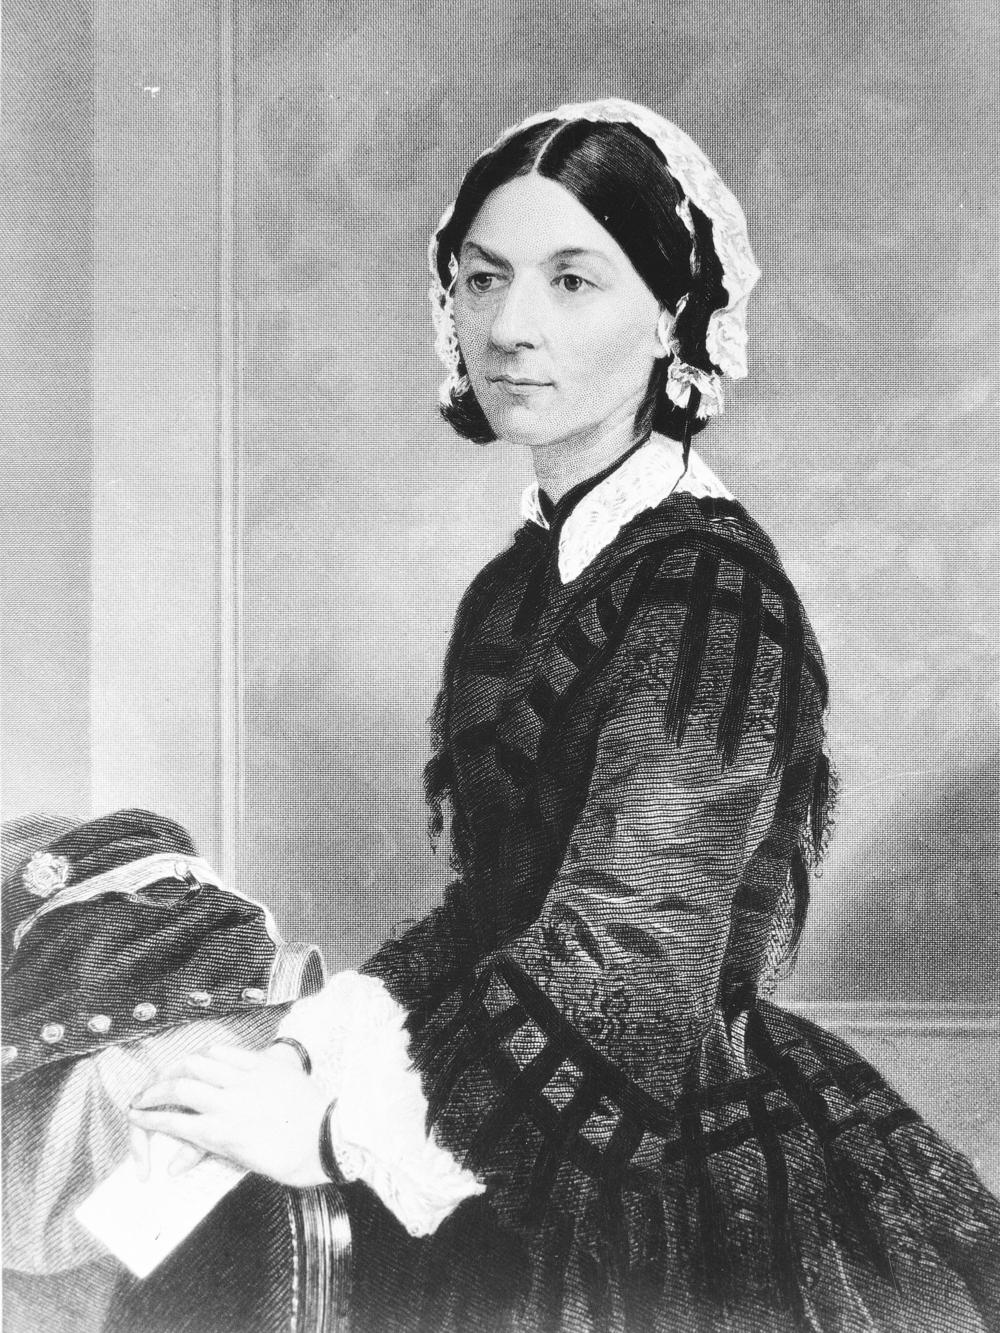 British nurse Florence Nightingale organized a hospital unit during the Crimean War of 1853-56. She is credited for bringing more sanitary conditions to the treatment of injured soldiers, who often died from infections and other illnesses, and not their wounds.